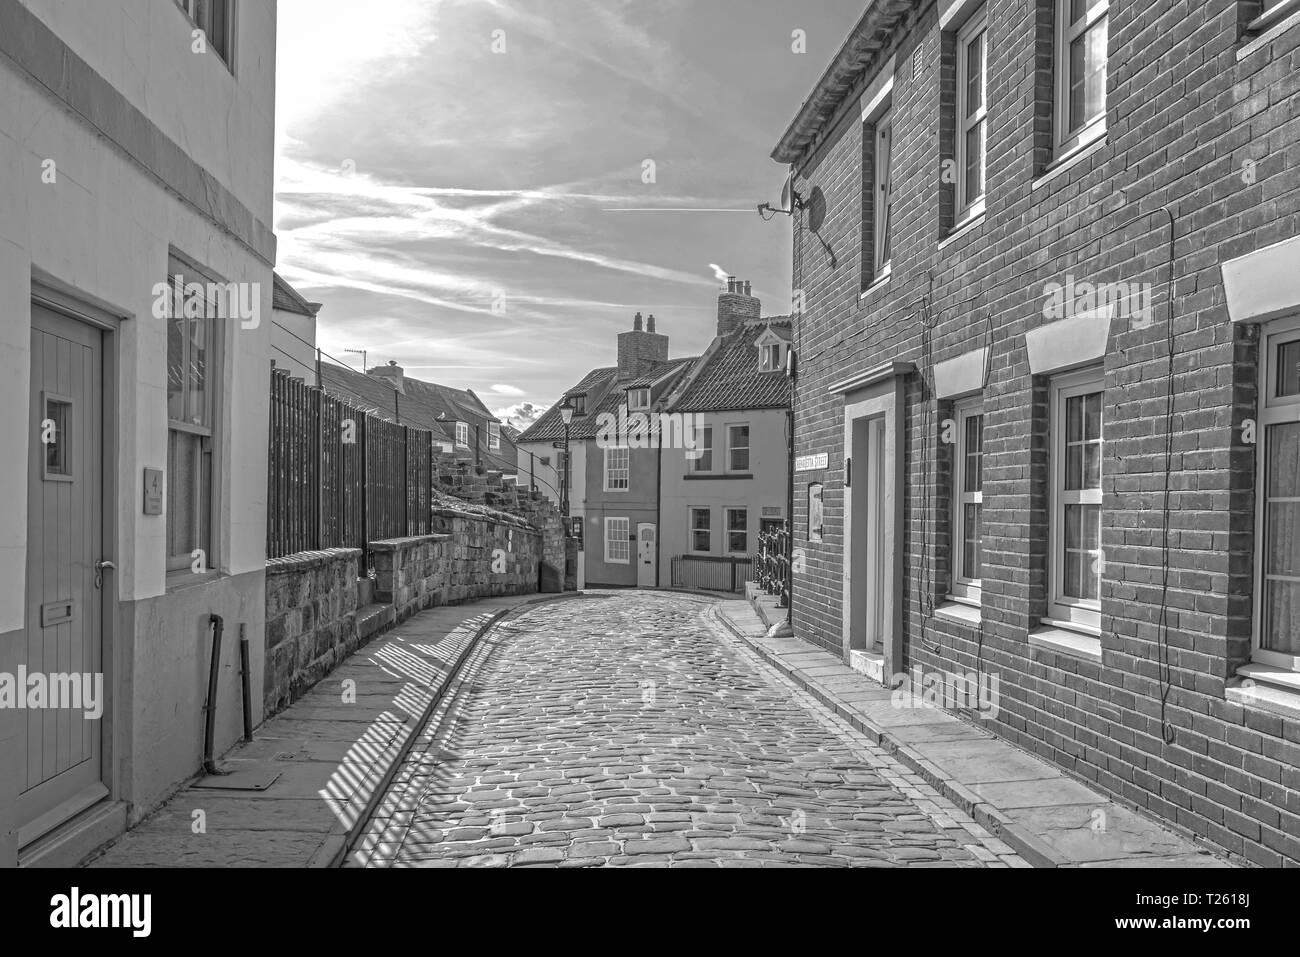 Lower end of Henrietta Street in Whitby.  Houses are on each side of a cobbled street with a lamppost at the end. A blue sky is above. Stock Photo